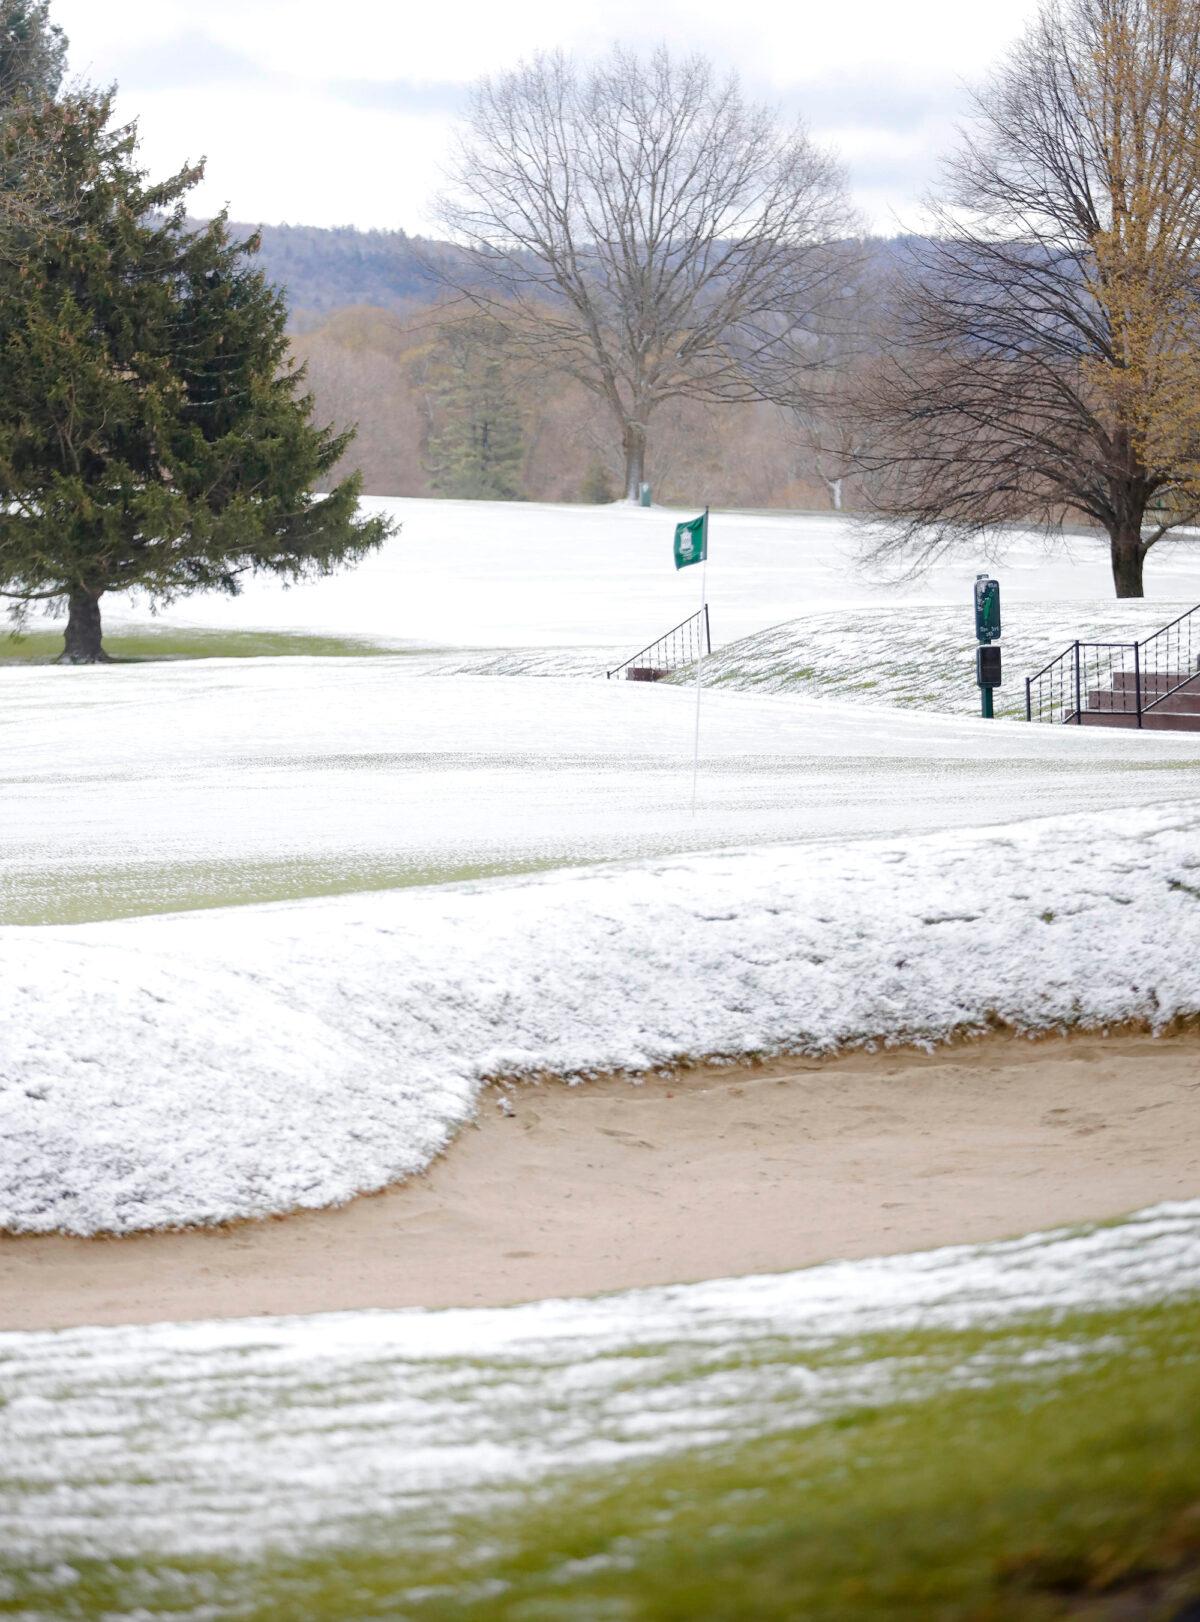 The greens and fairways are covered in snow, just as golf courses were starting to open for the season at Country Club of Pittsfield, Mass., on May 9, 2020. (Stephanie Zollshan/The Berkshire Eagle via AP)